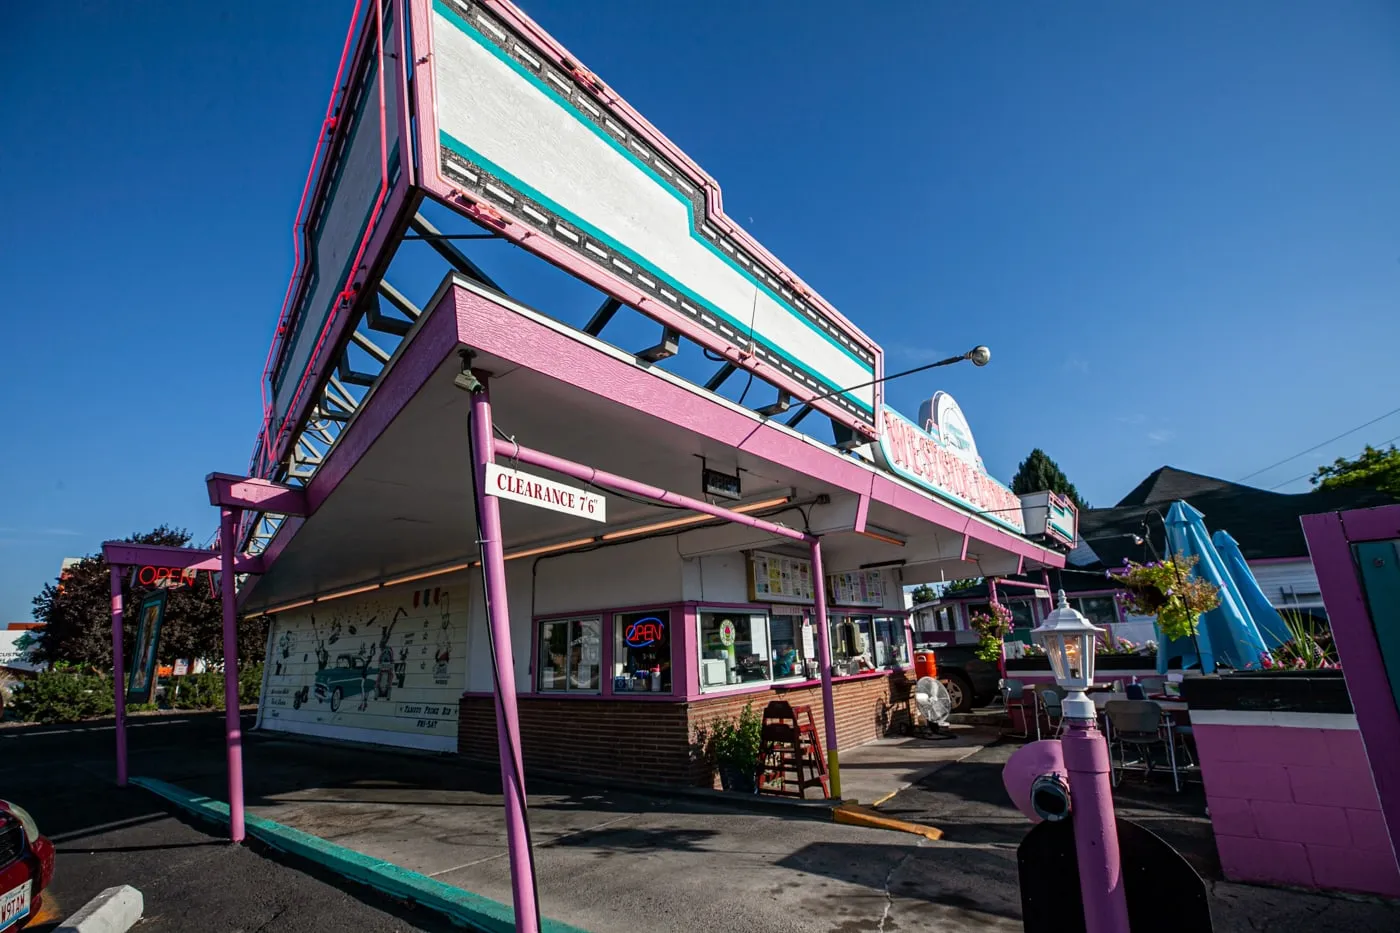 Westside Drive In in Boise, Idaho - a classic pink diner featured on Diners, Drive Ins, and Dives.